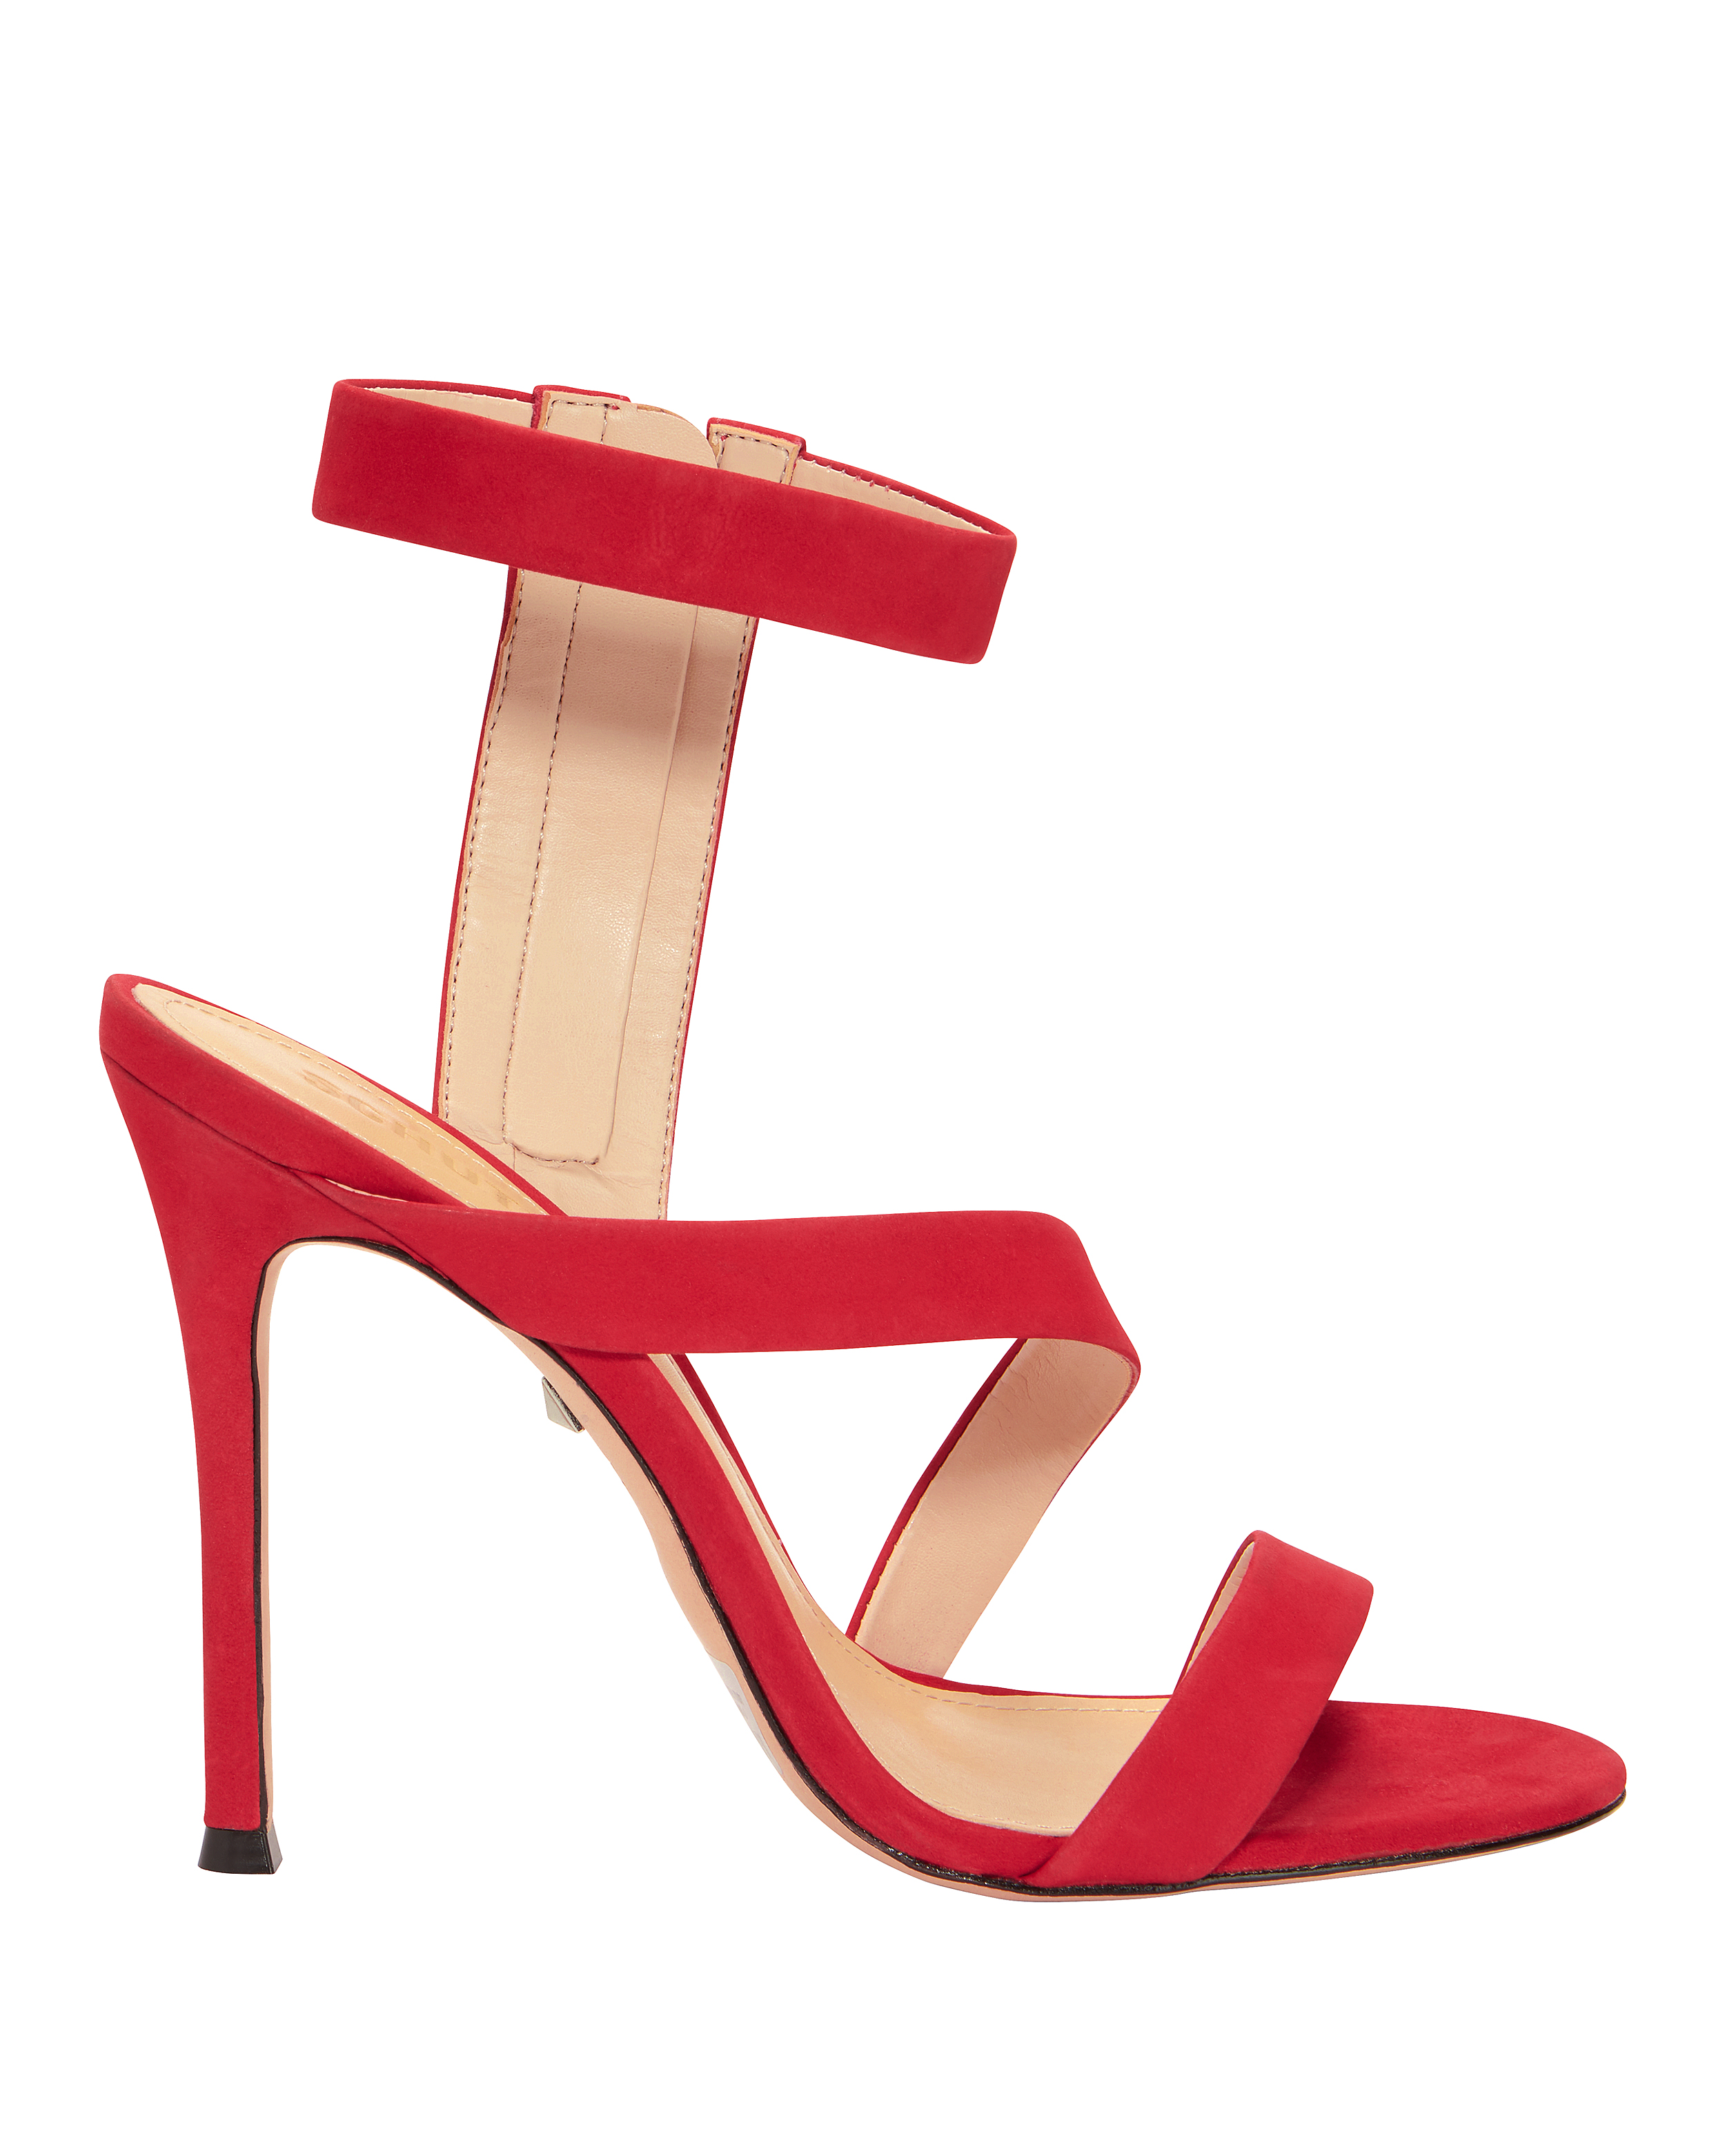 Lauanne Strappy Red Sandals